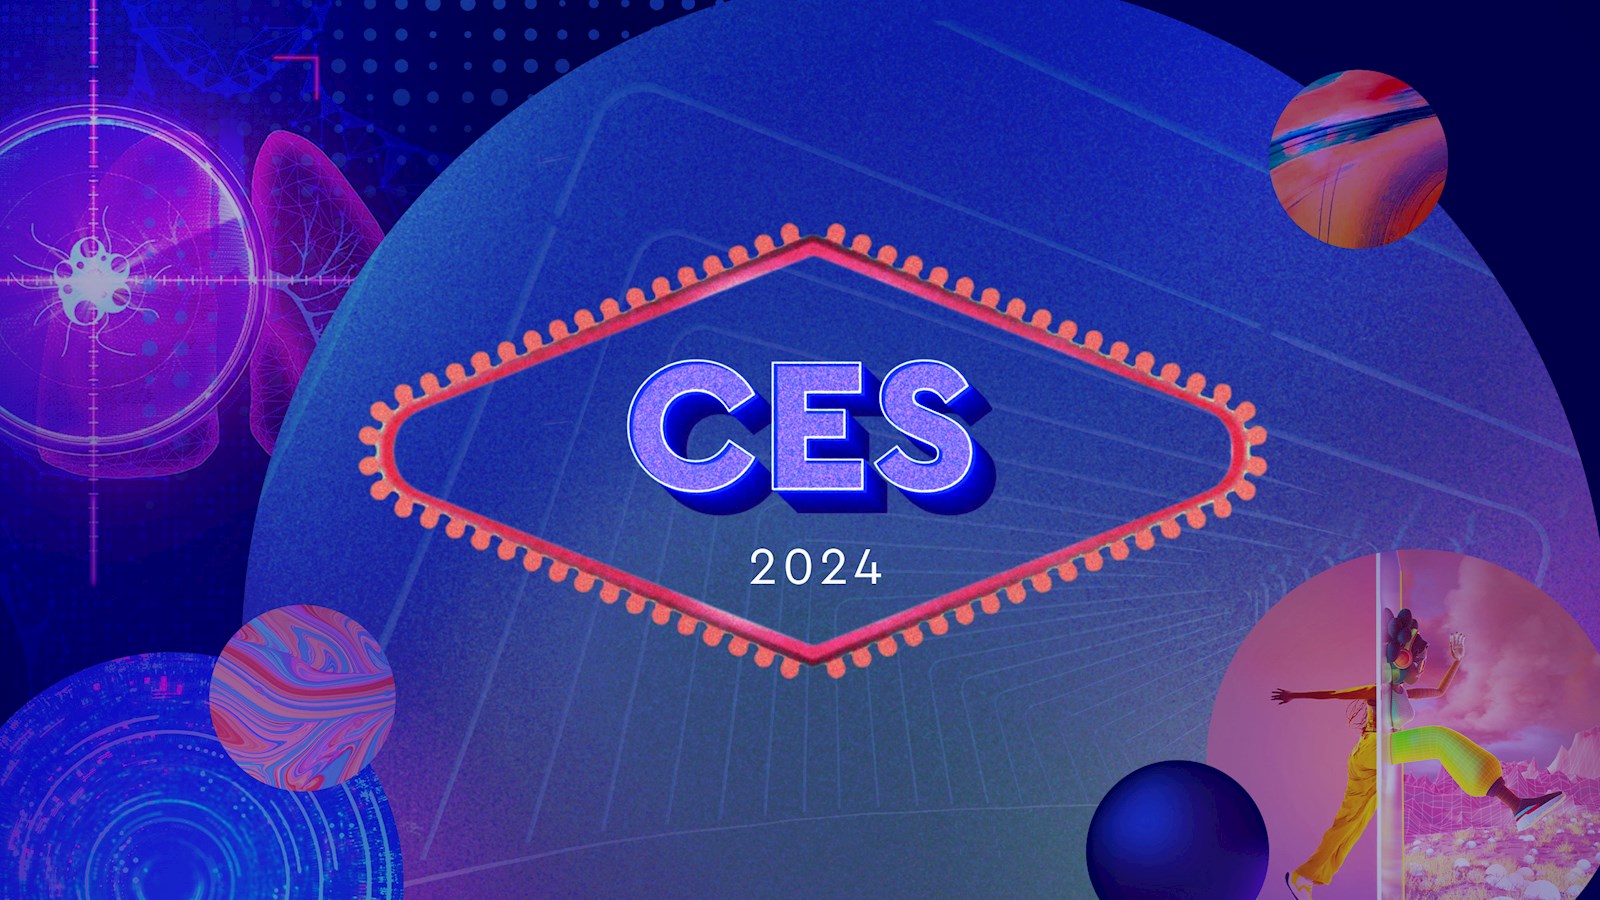 CES 2024 on blue and purple background